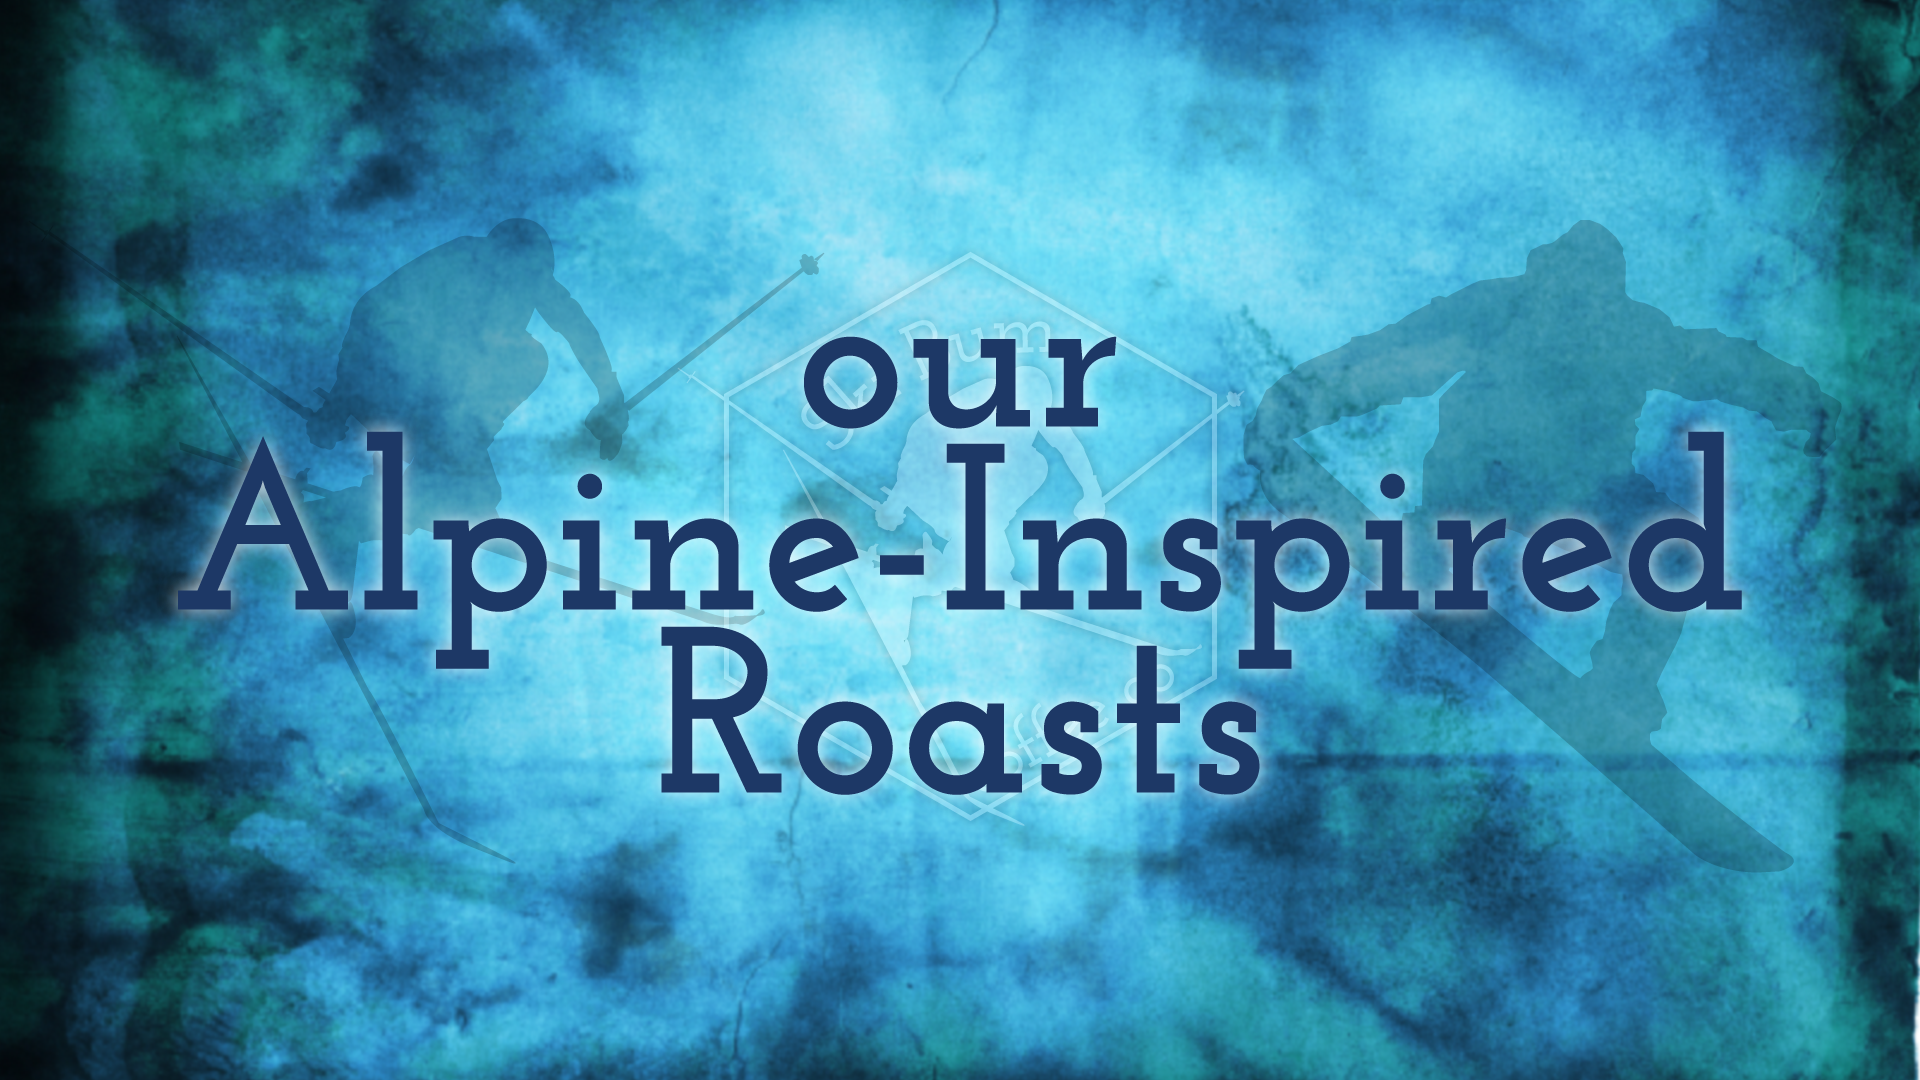 Our Alpine-Inspired Roasts